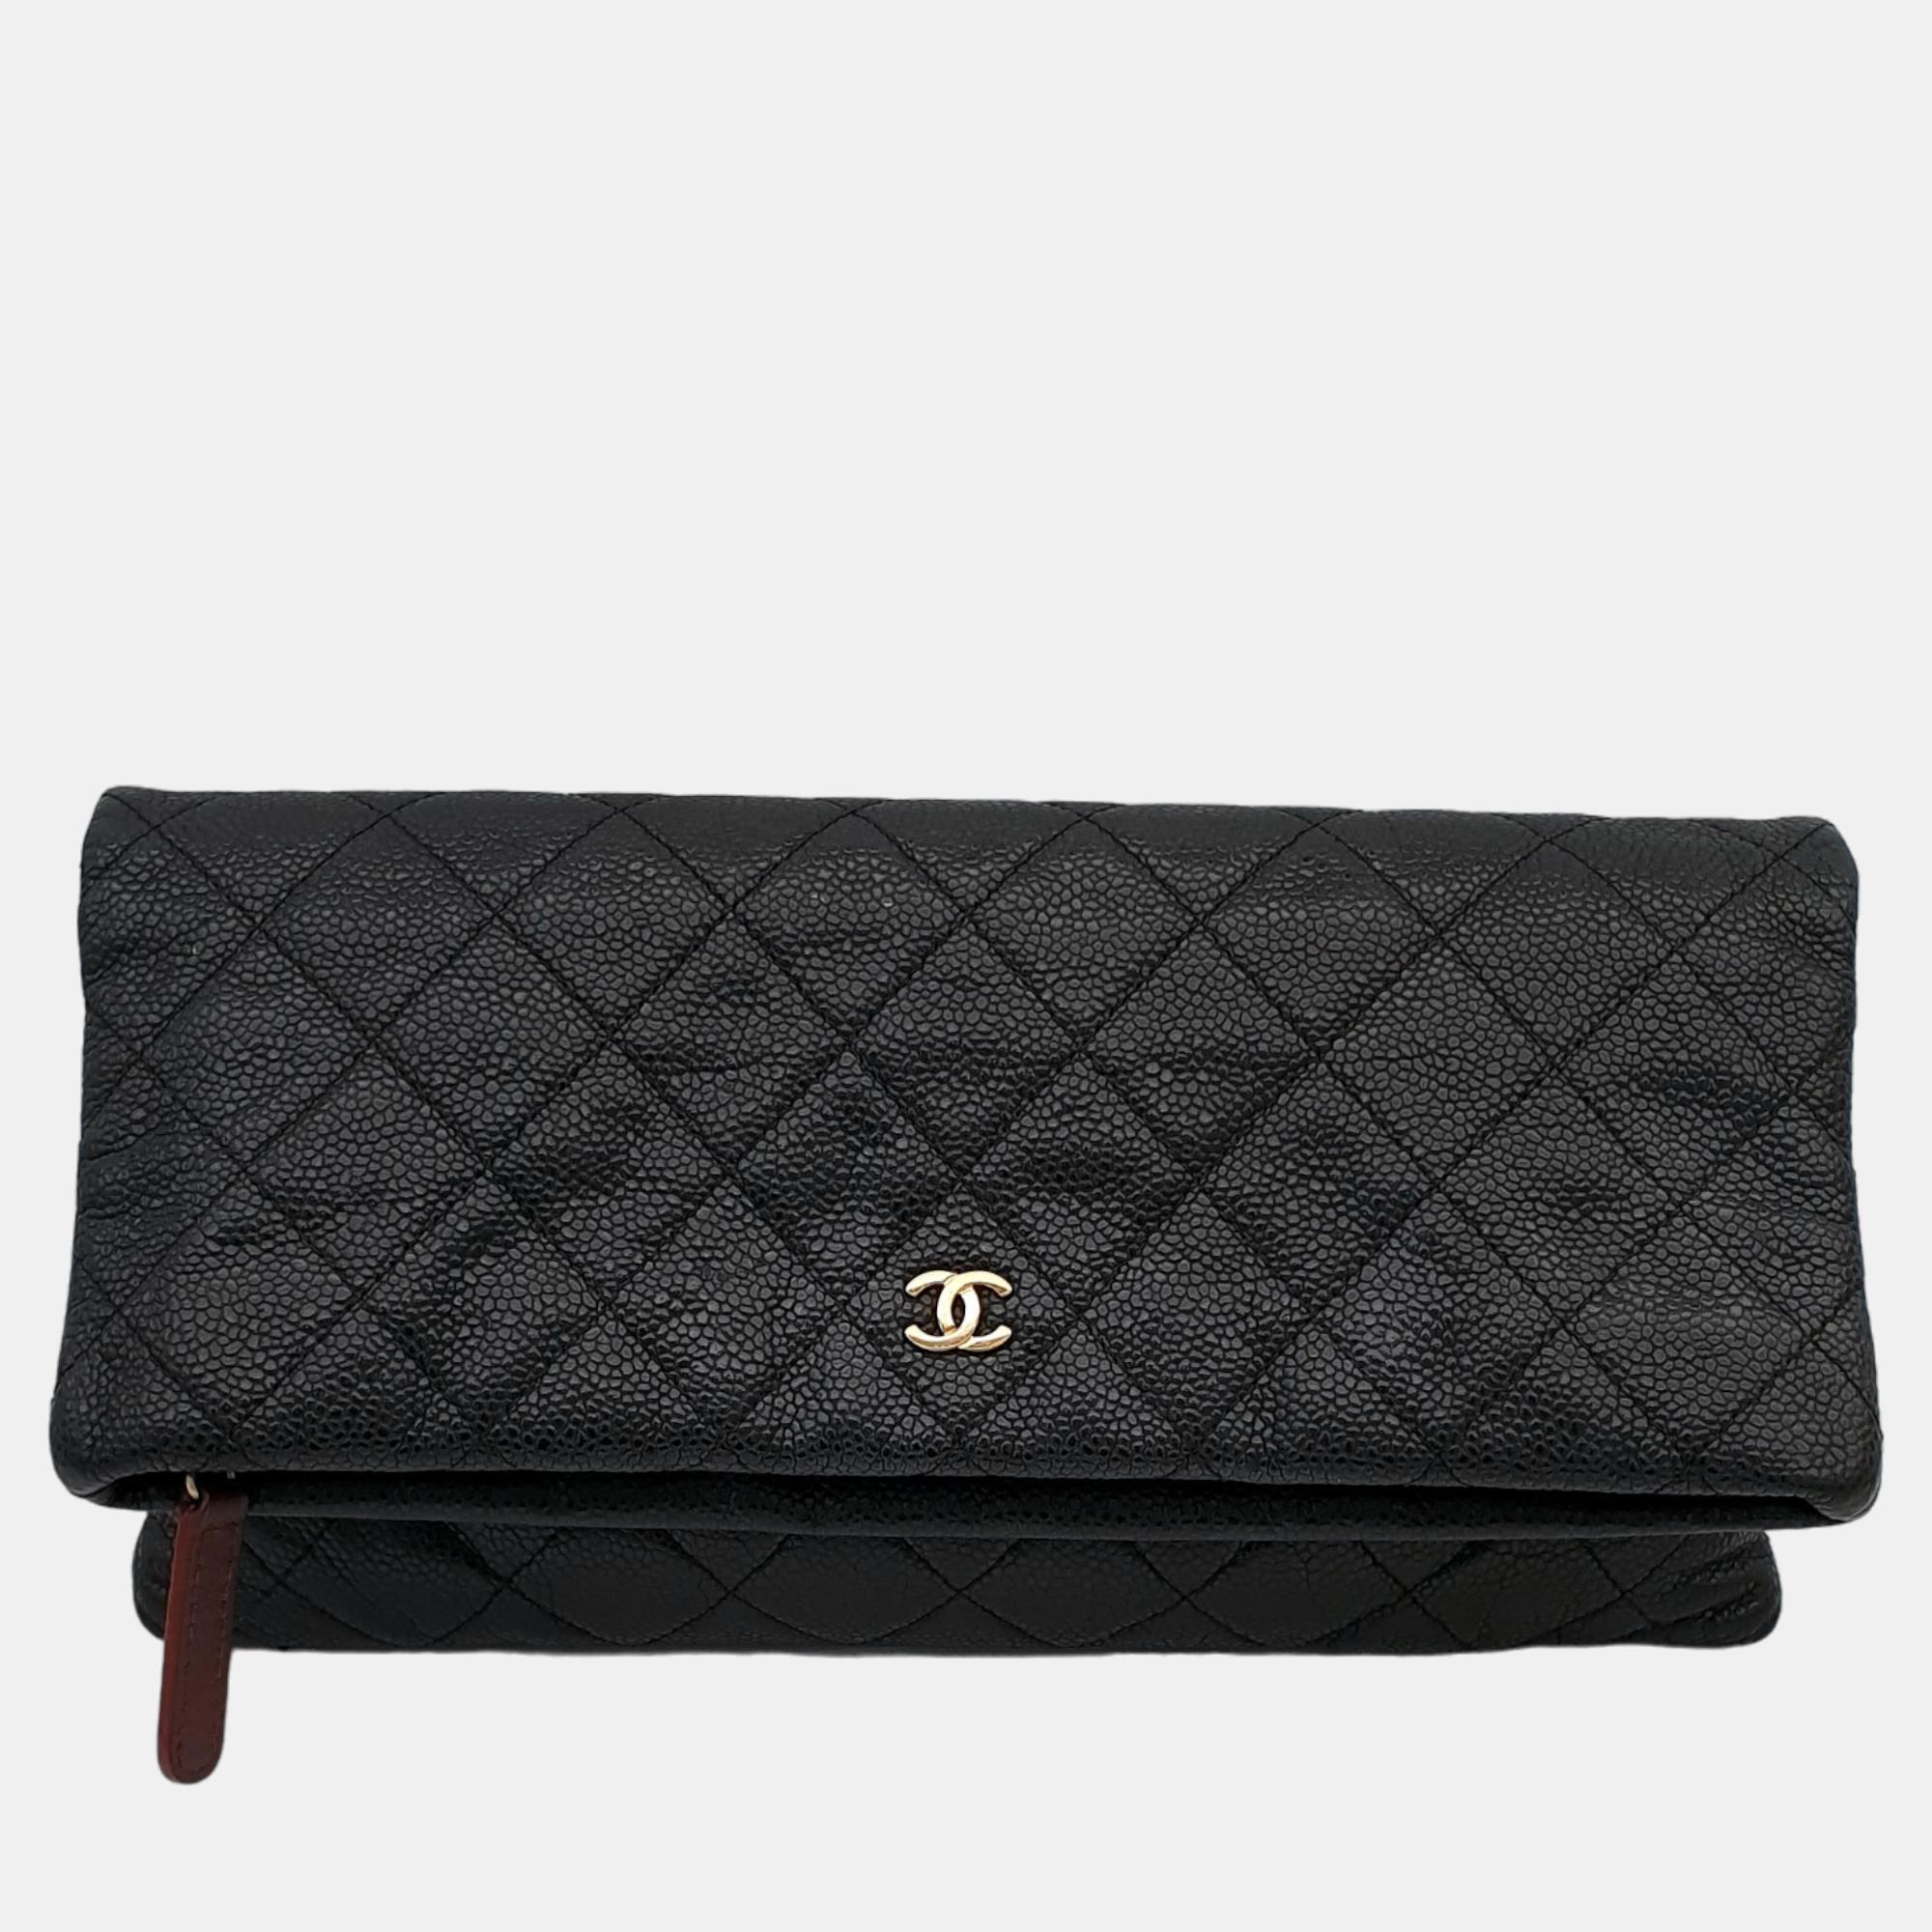 Pre-owned Chanel Black Leather Beauty Cc Foldover Clutch Bag